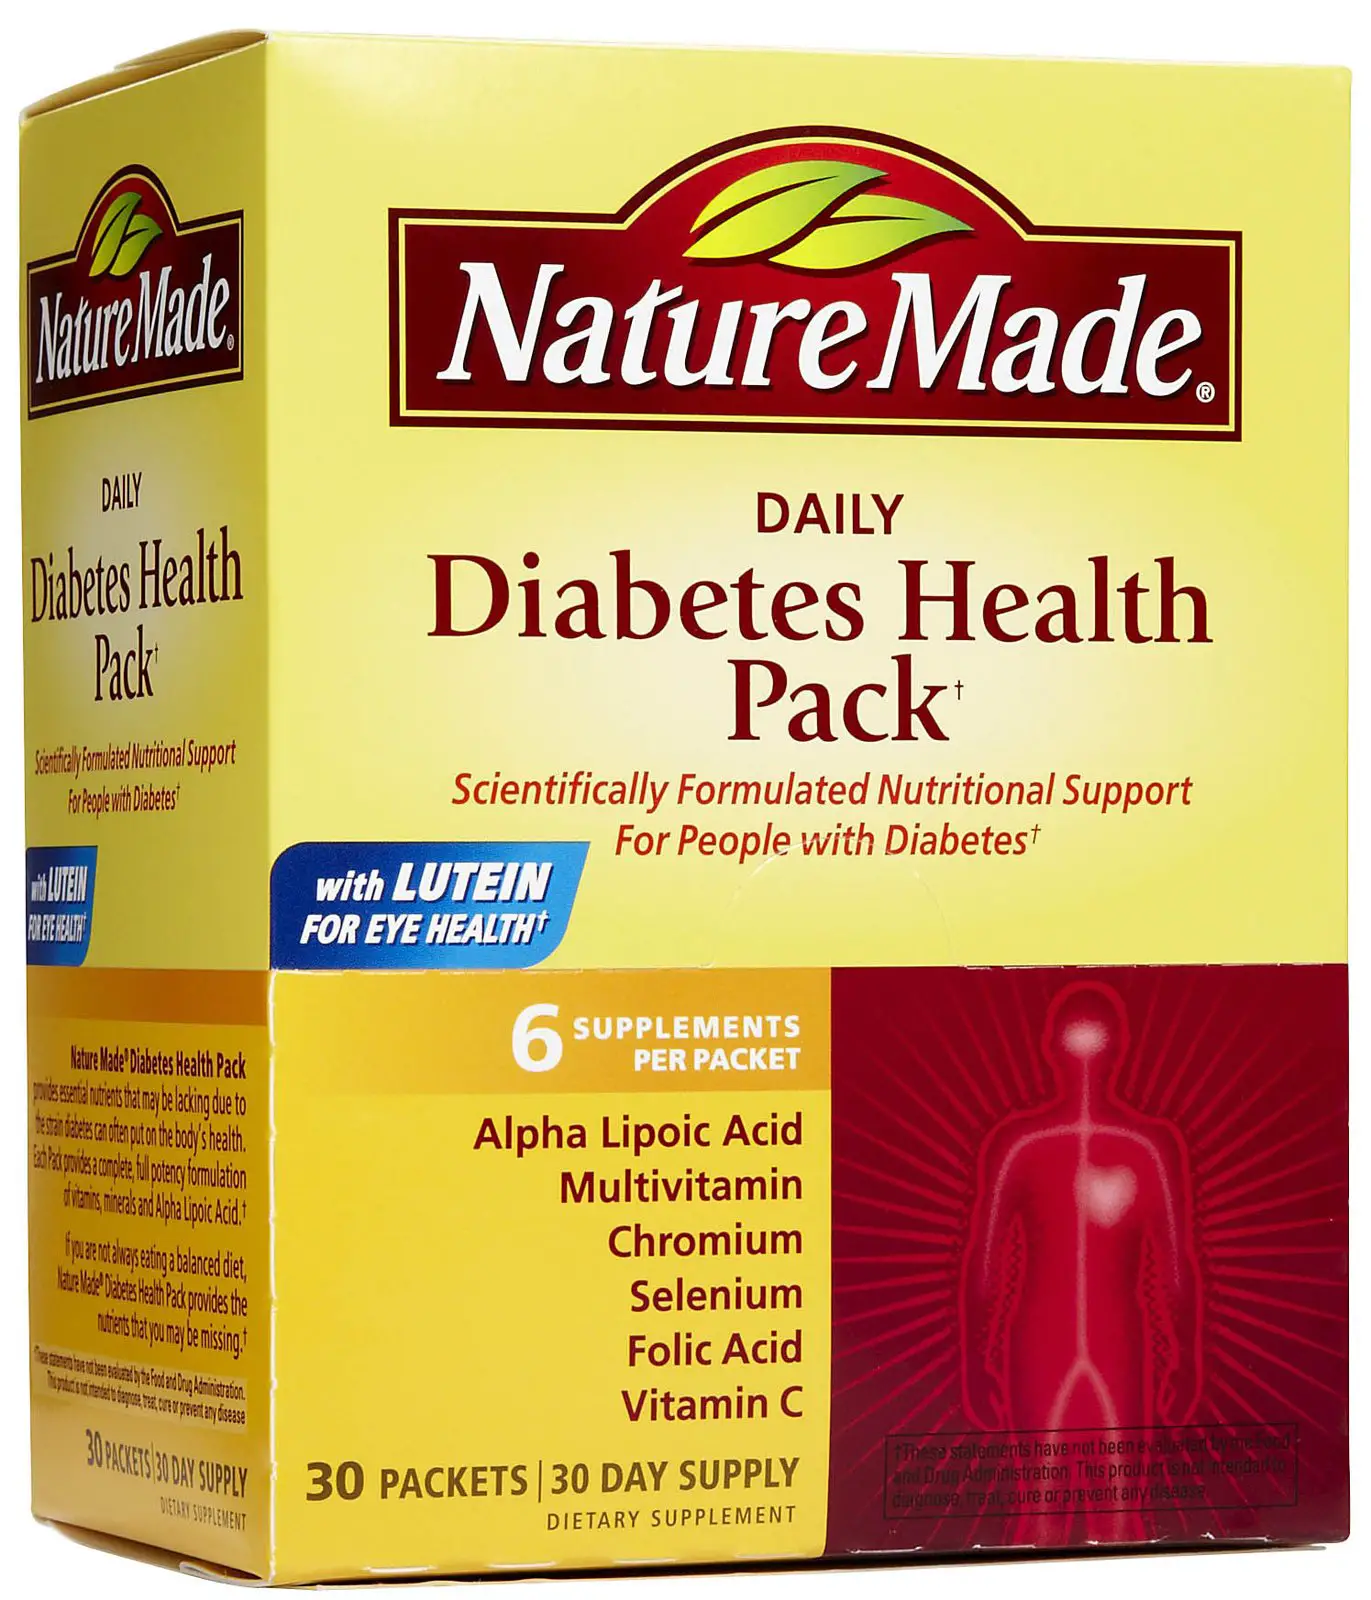 Nature Made Diabetes Health Pack Review